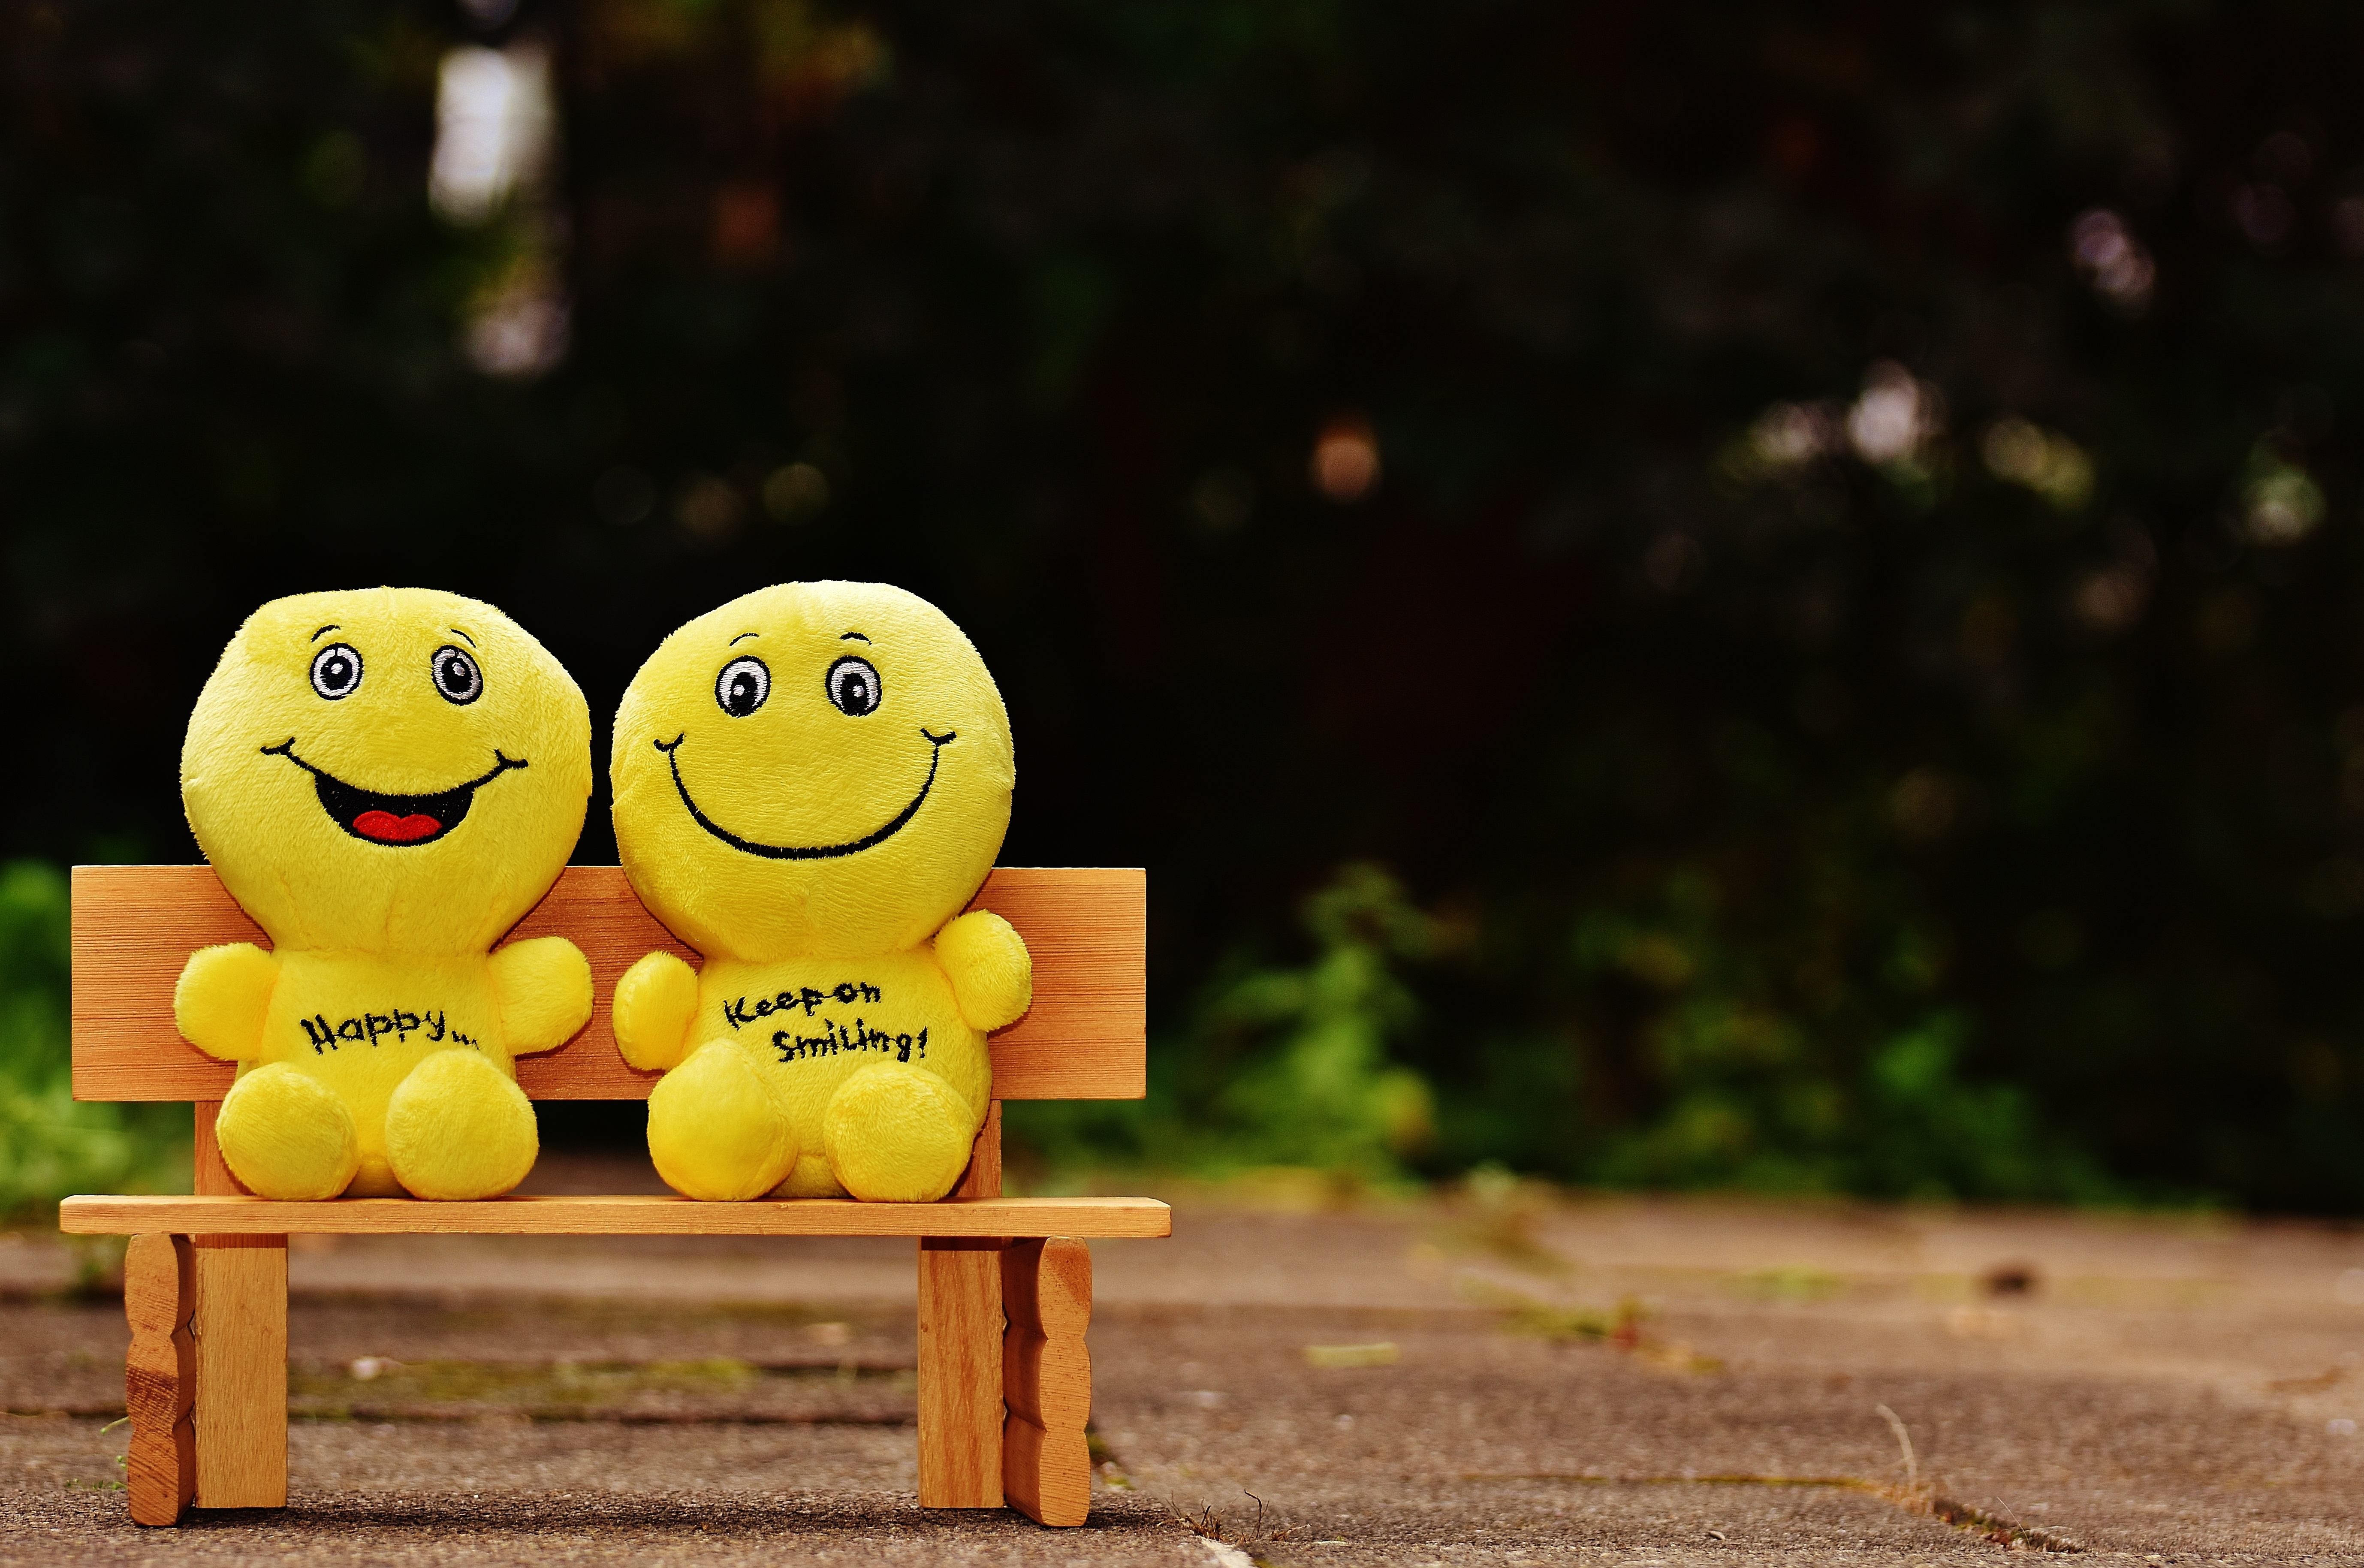 Wallpaper Smiles Happy Cheerful Smile Bench